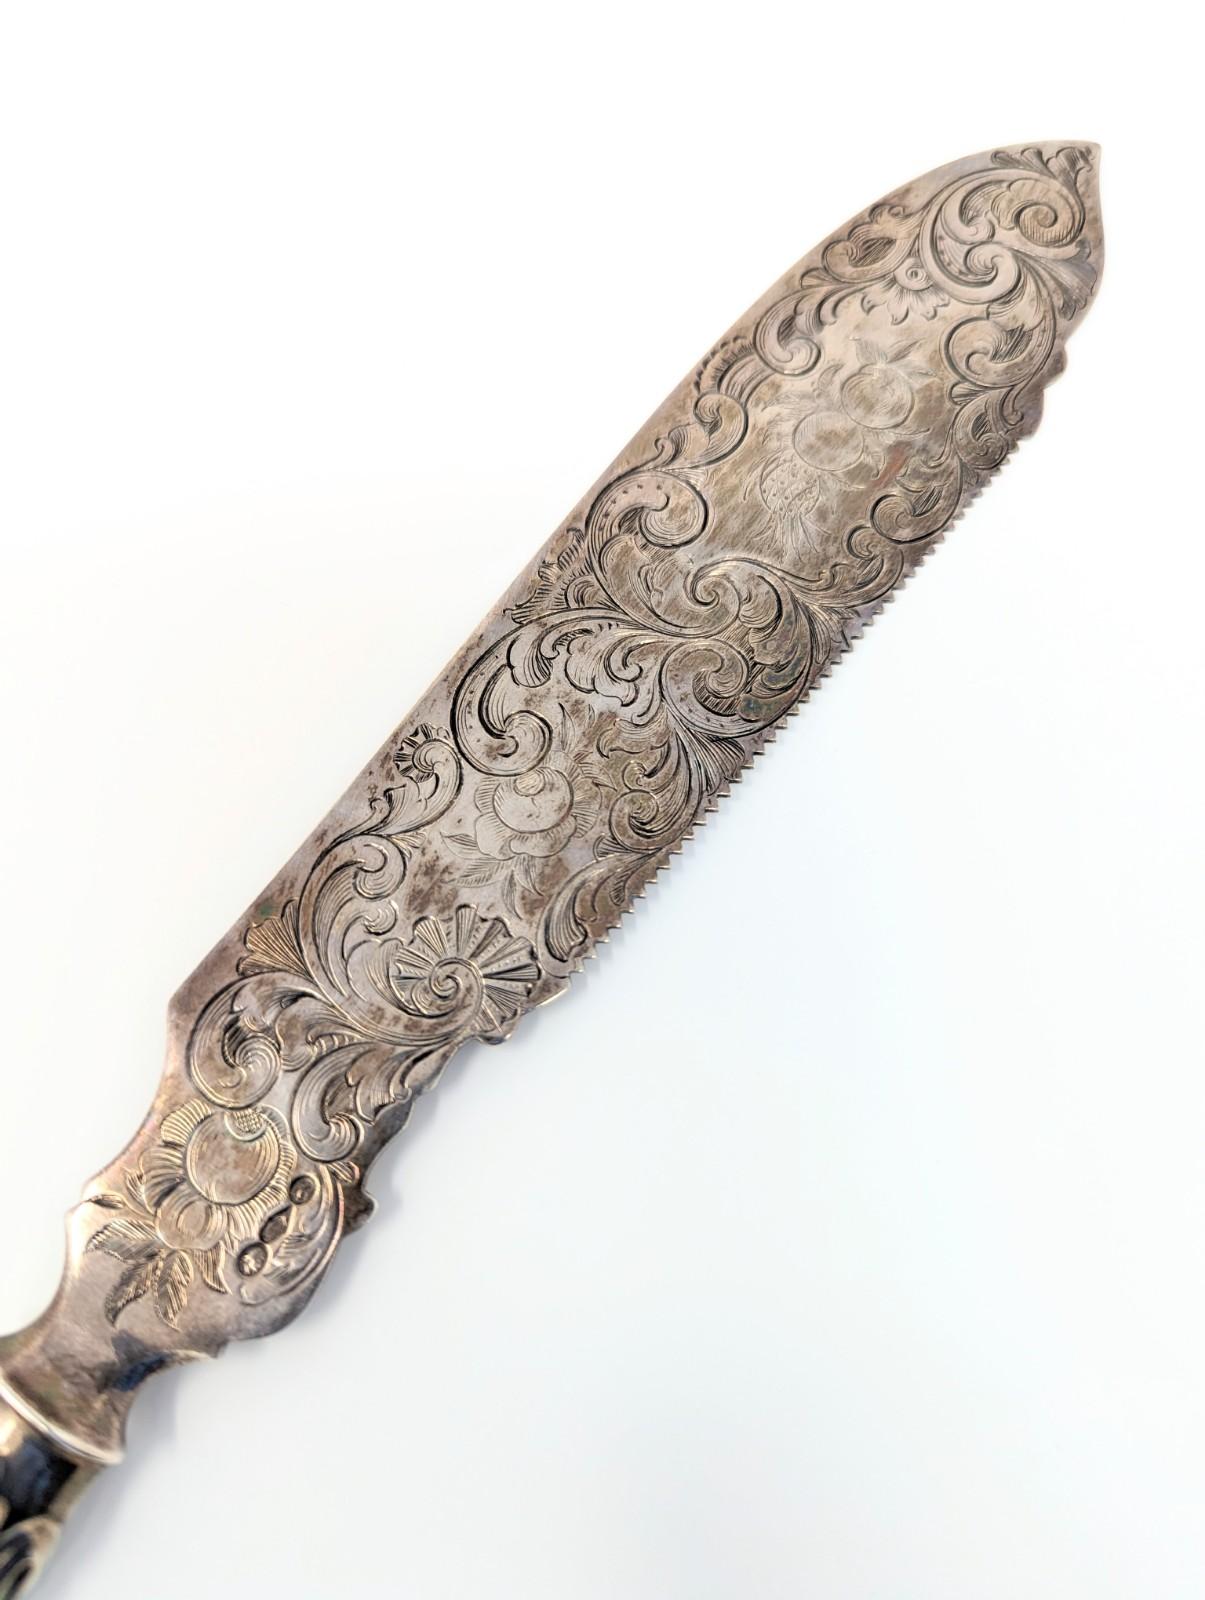 Victorian Antique Fish Knife Unique Sea Serpent Snake Sterling Silver French Cake Etched For Sale